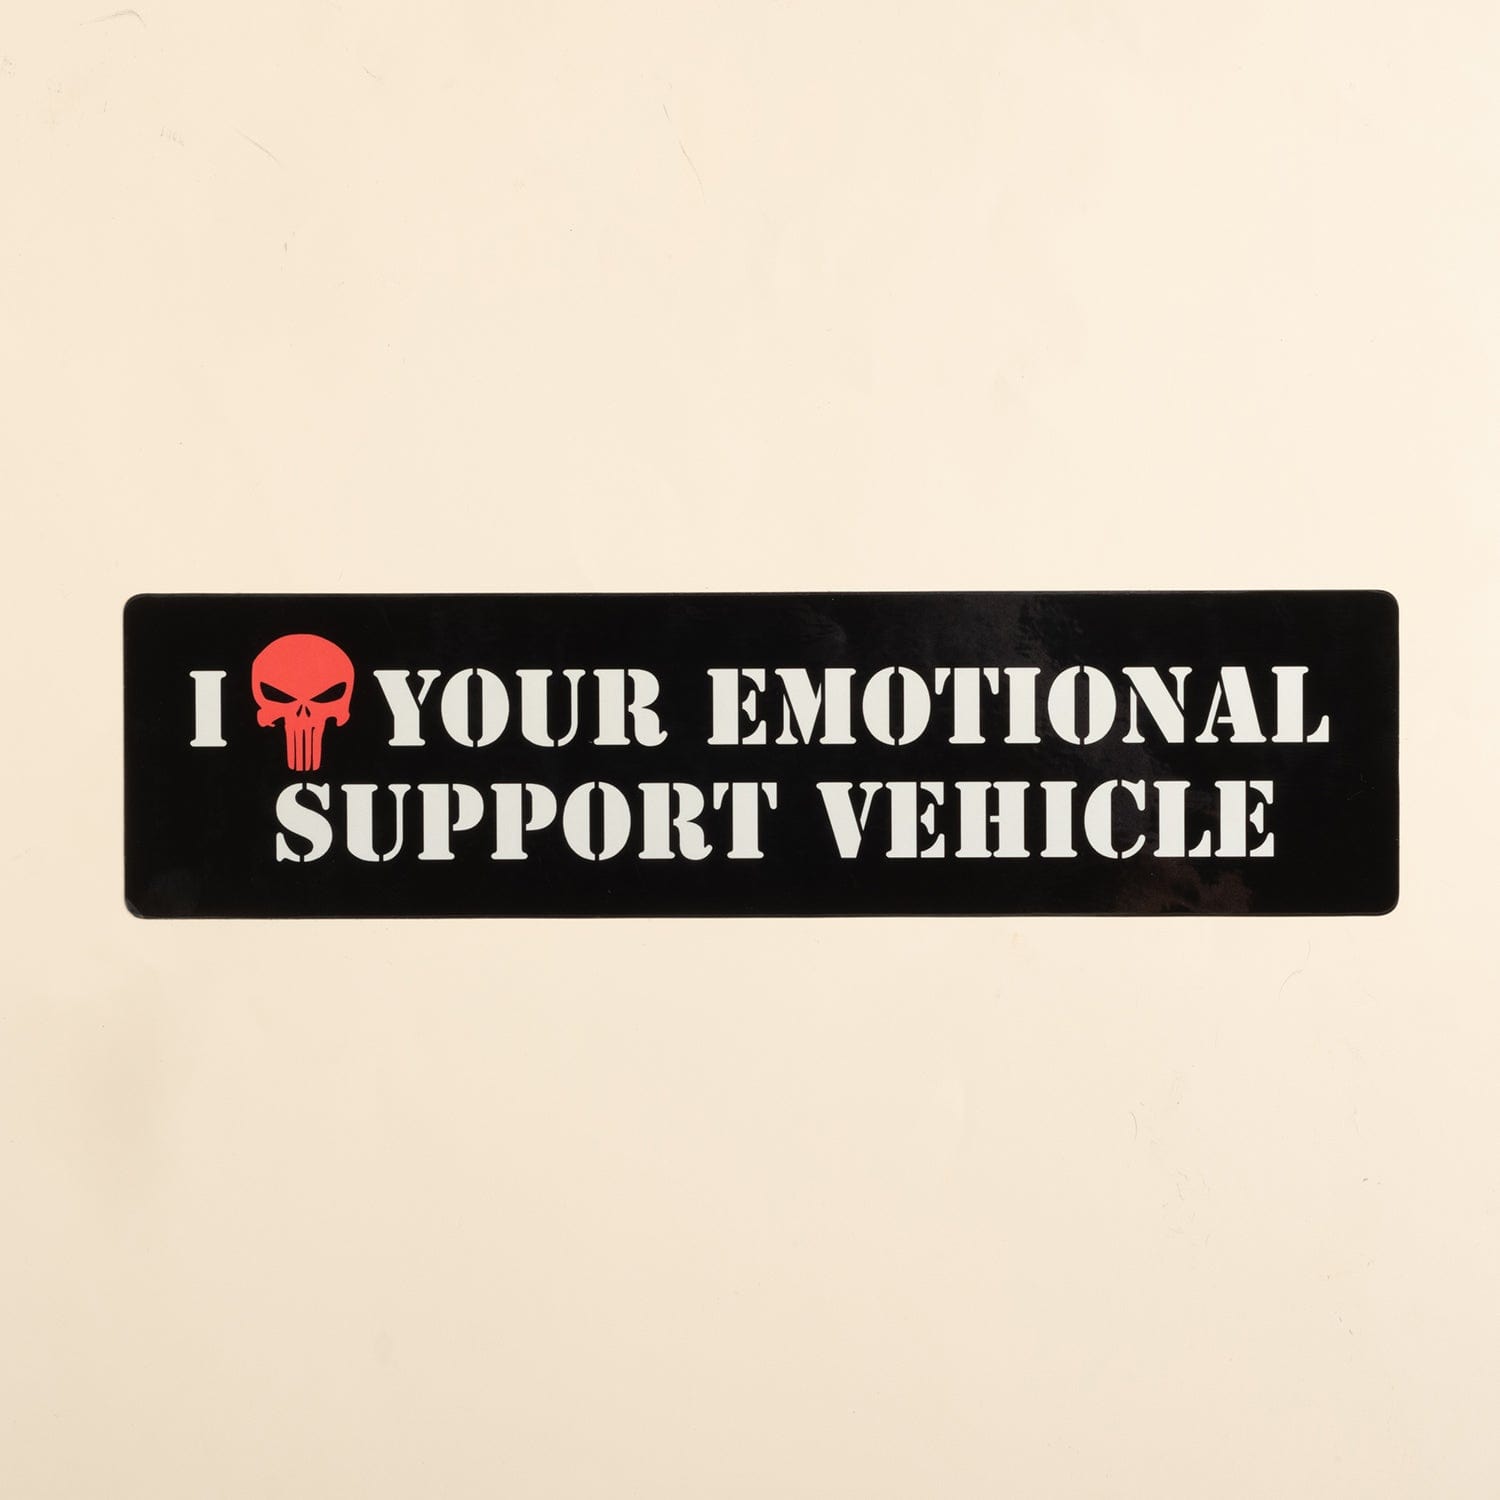 I [Heart] Your Emotional Support Vehicle Sticker